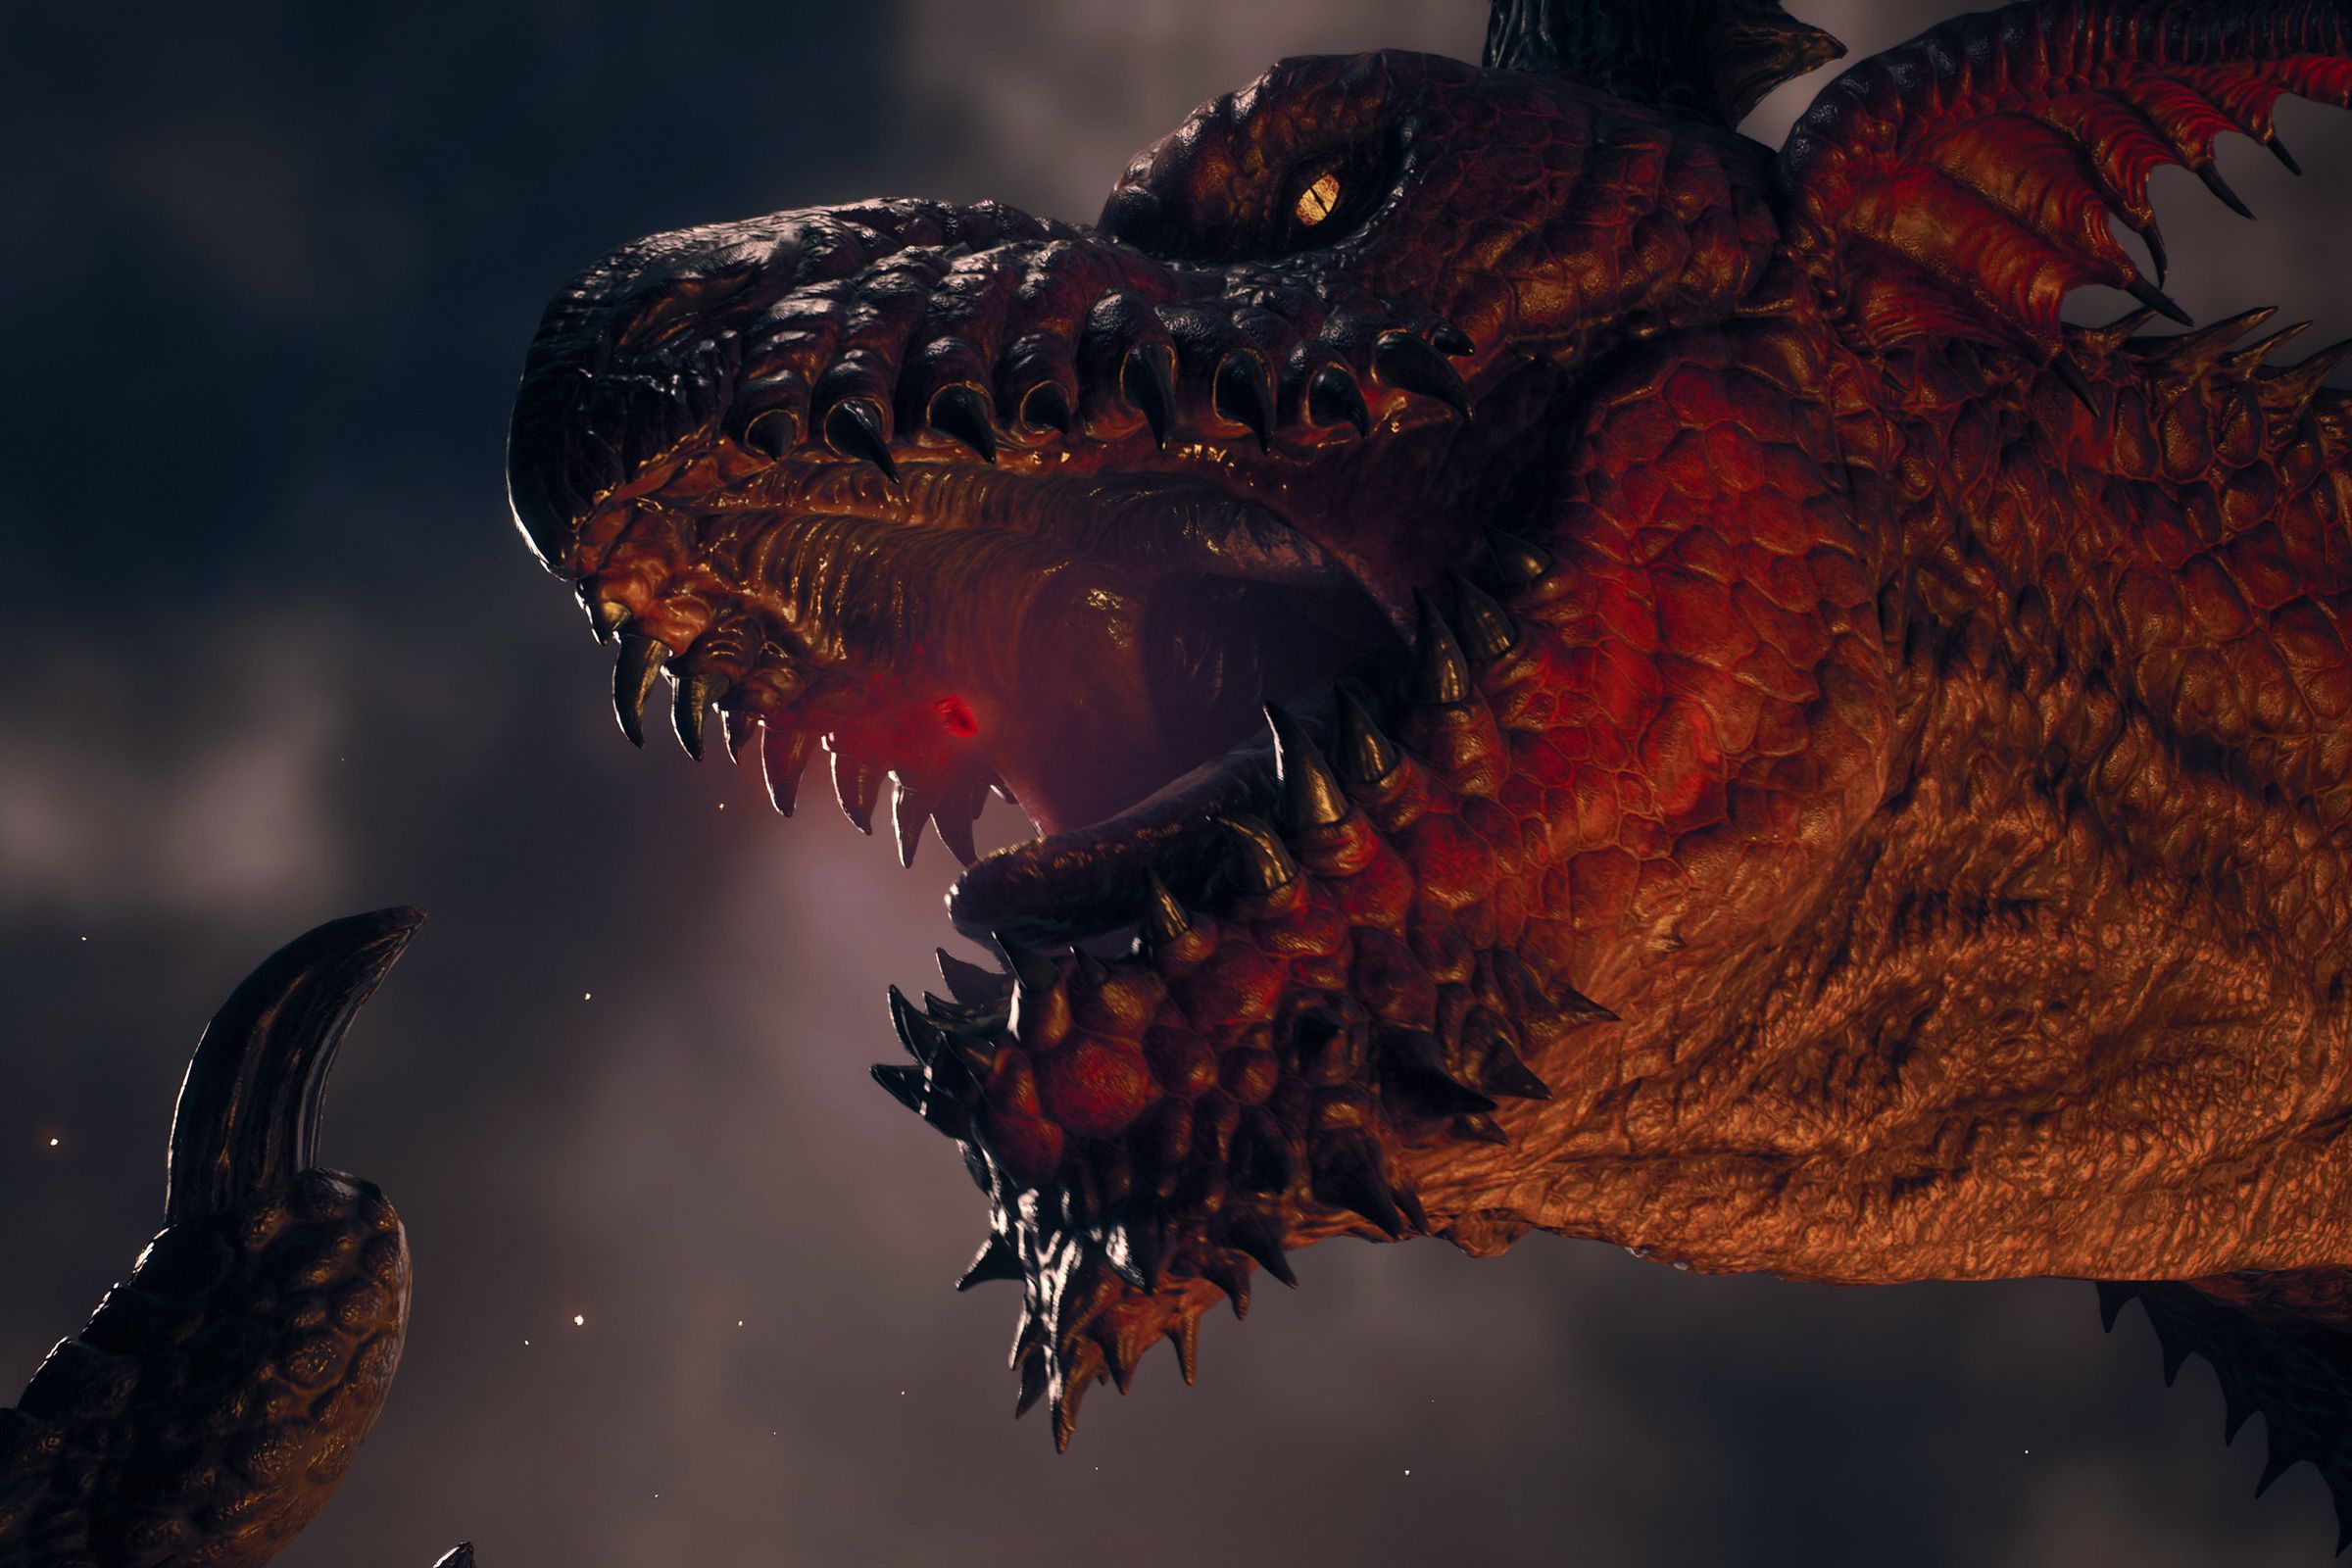 A screenshot of a dragon in the video game Dragon’s Dogma 2.